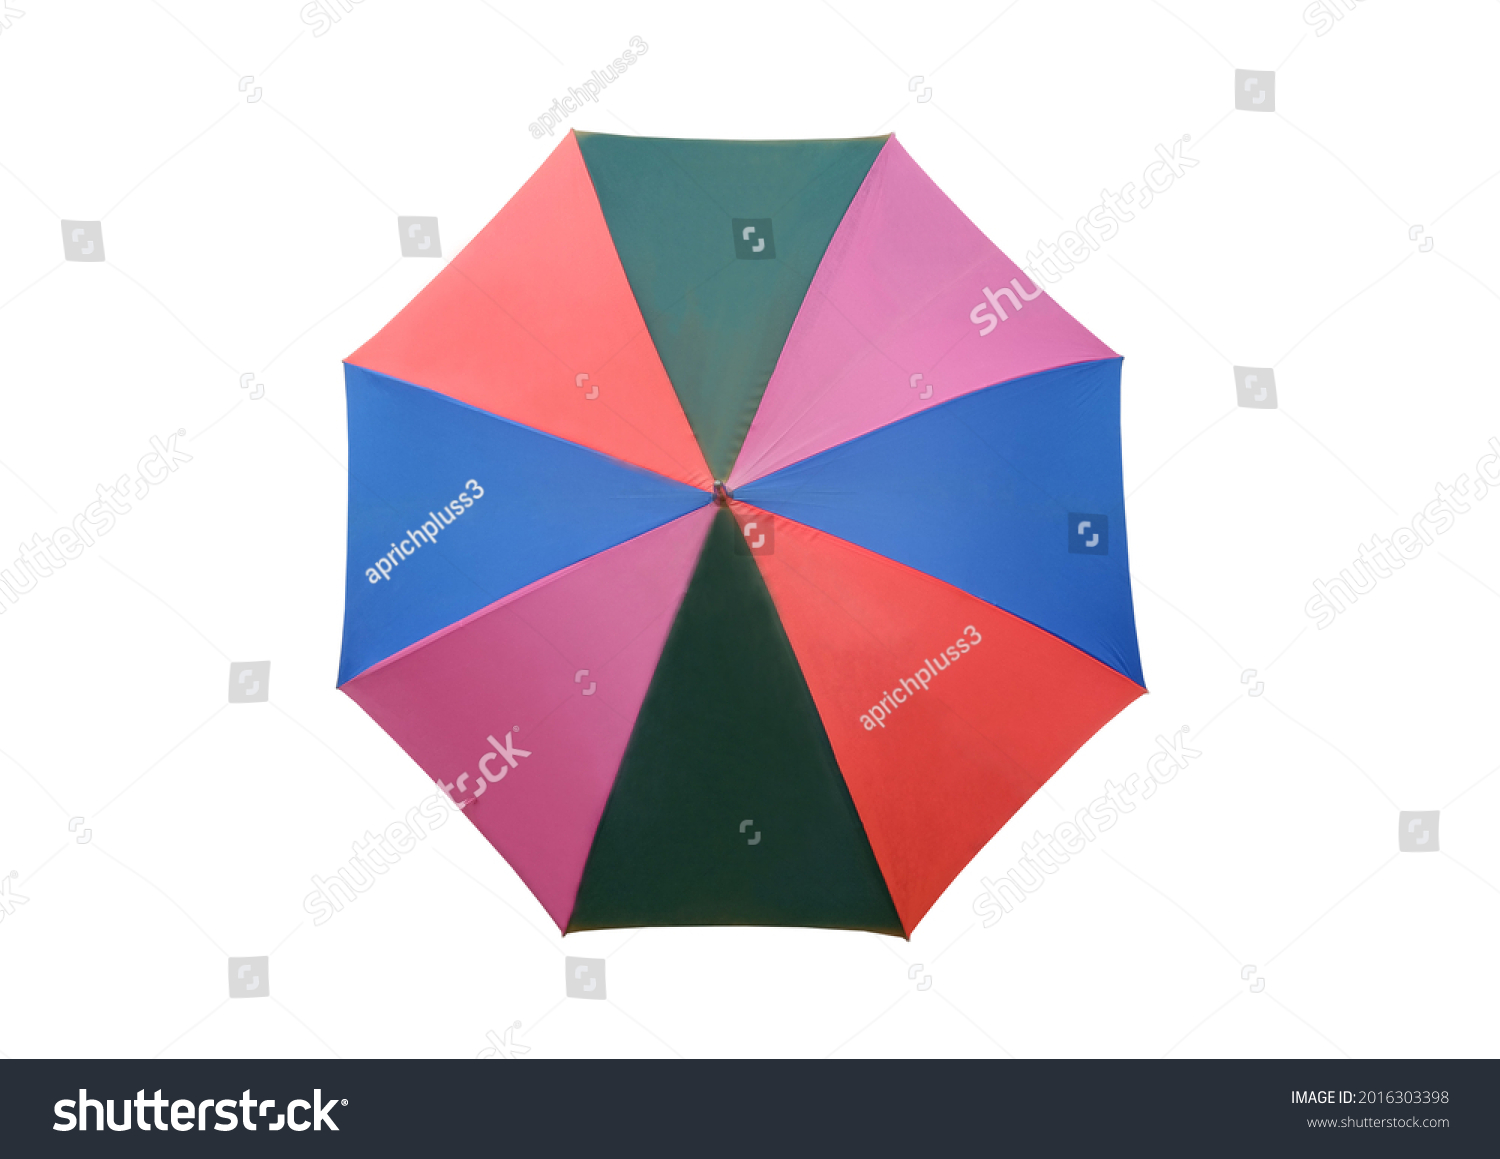 Top view, Single rainbow umbrella isolated on white background for stock photo or design, invesment, business, summer concept #2016303398